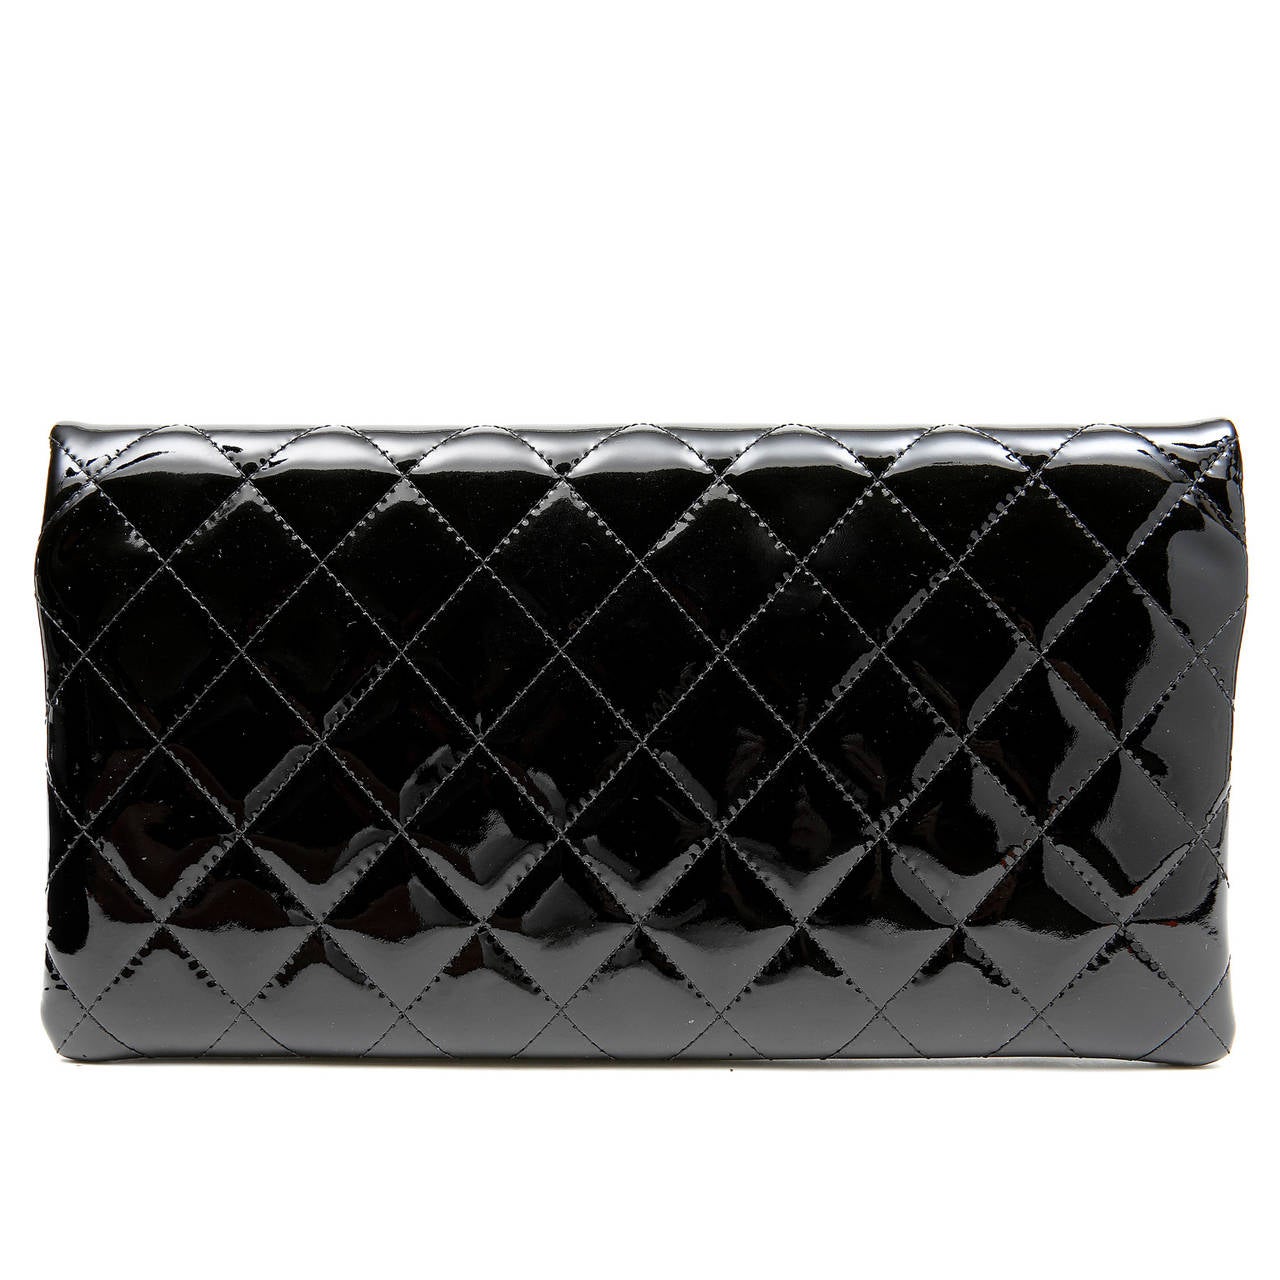 Chanel Black Patent Leather Fold Over Clutch

PRISTINE condition, never before carried.   A classic addition to any wardrobe, it is certain to become a treasured favorite.

Black patent leather is quilted in signature Chanel diamond stitched